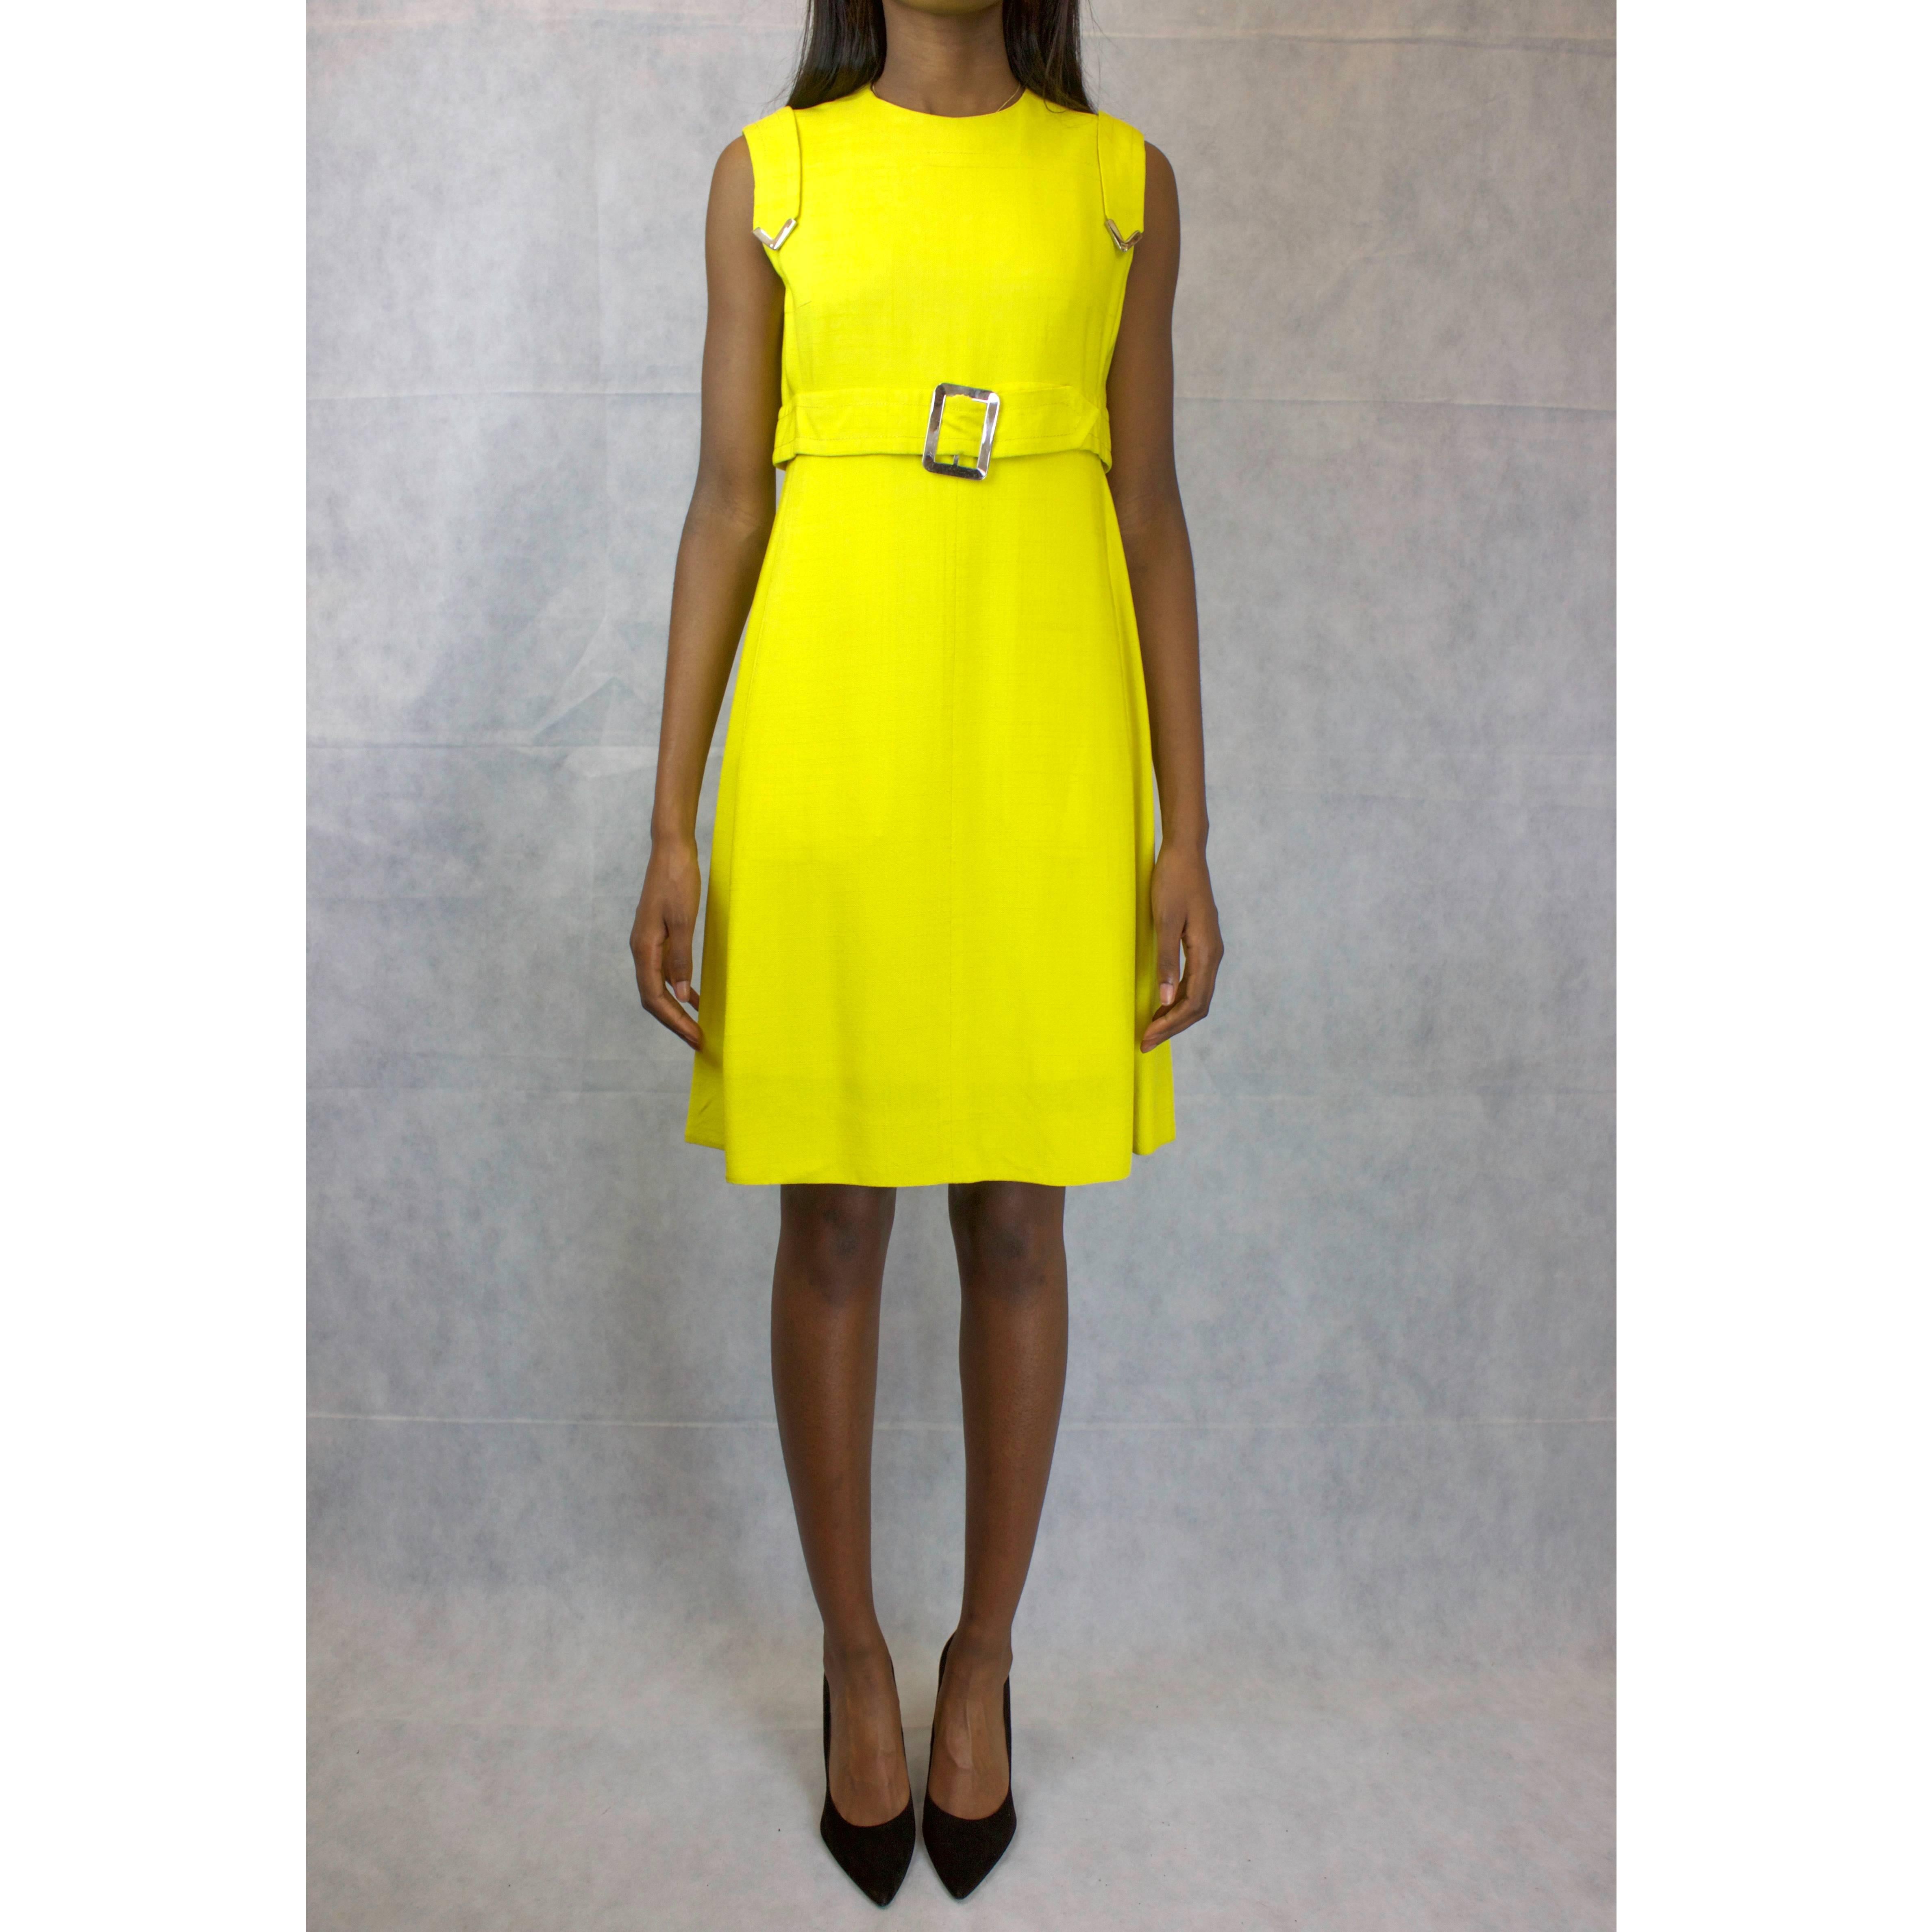 This vibrant Ted Lapidus couture-finished dress No: 21853 is a French take on the fashion that characterised London Mod subculture of the 1960s.

An A-line shift dress made from linen in the flamboyant yellow of the era. The metal buckle on the